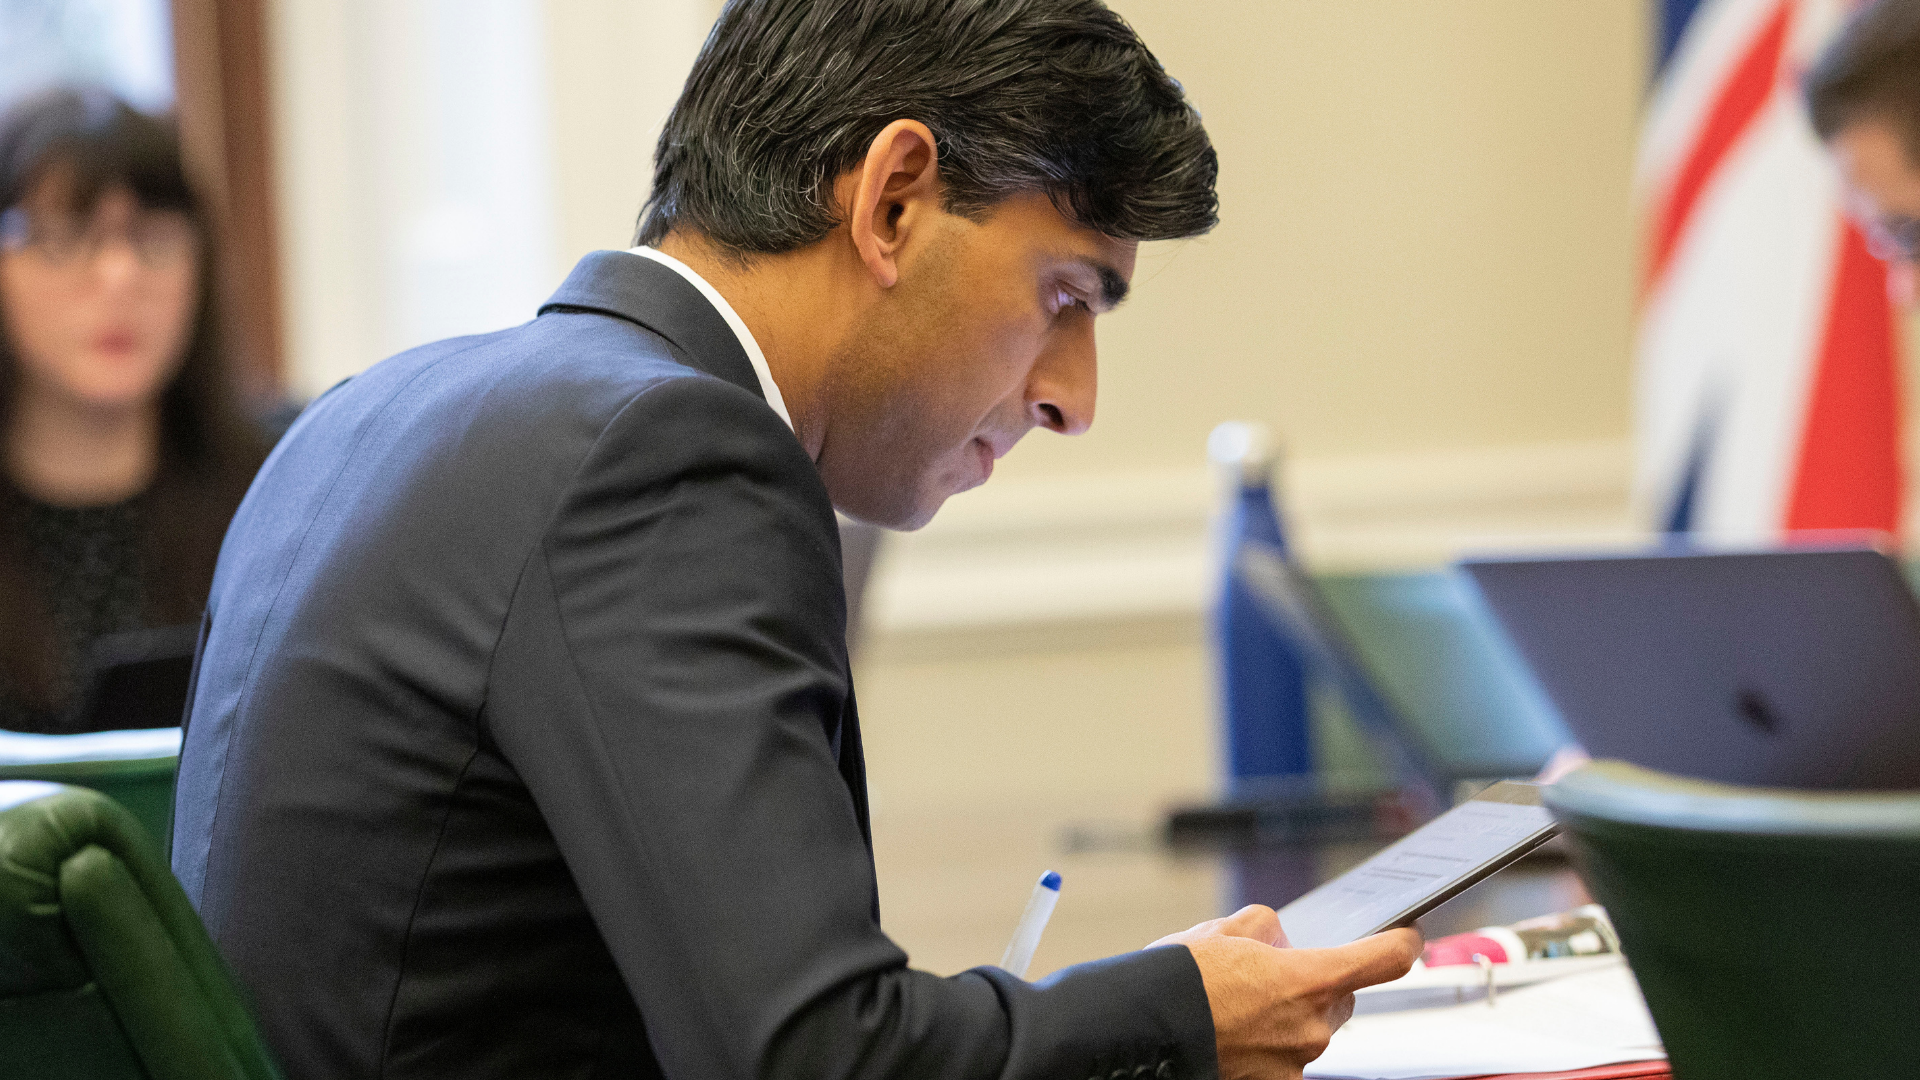 Rishi Sunak's plans for a public sector pay freeze could harm the economy, unions warn.